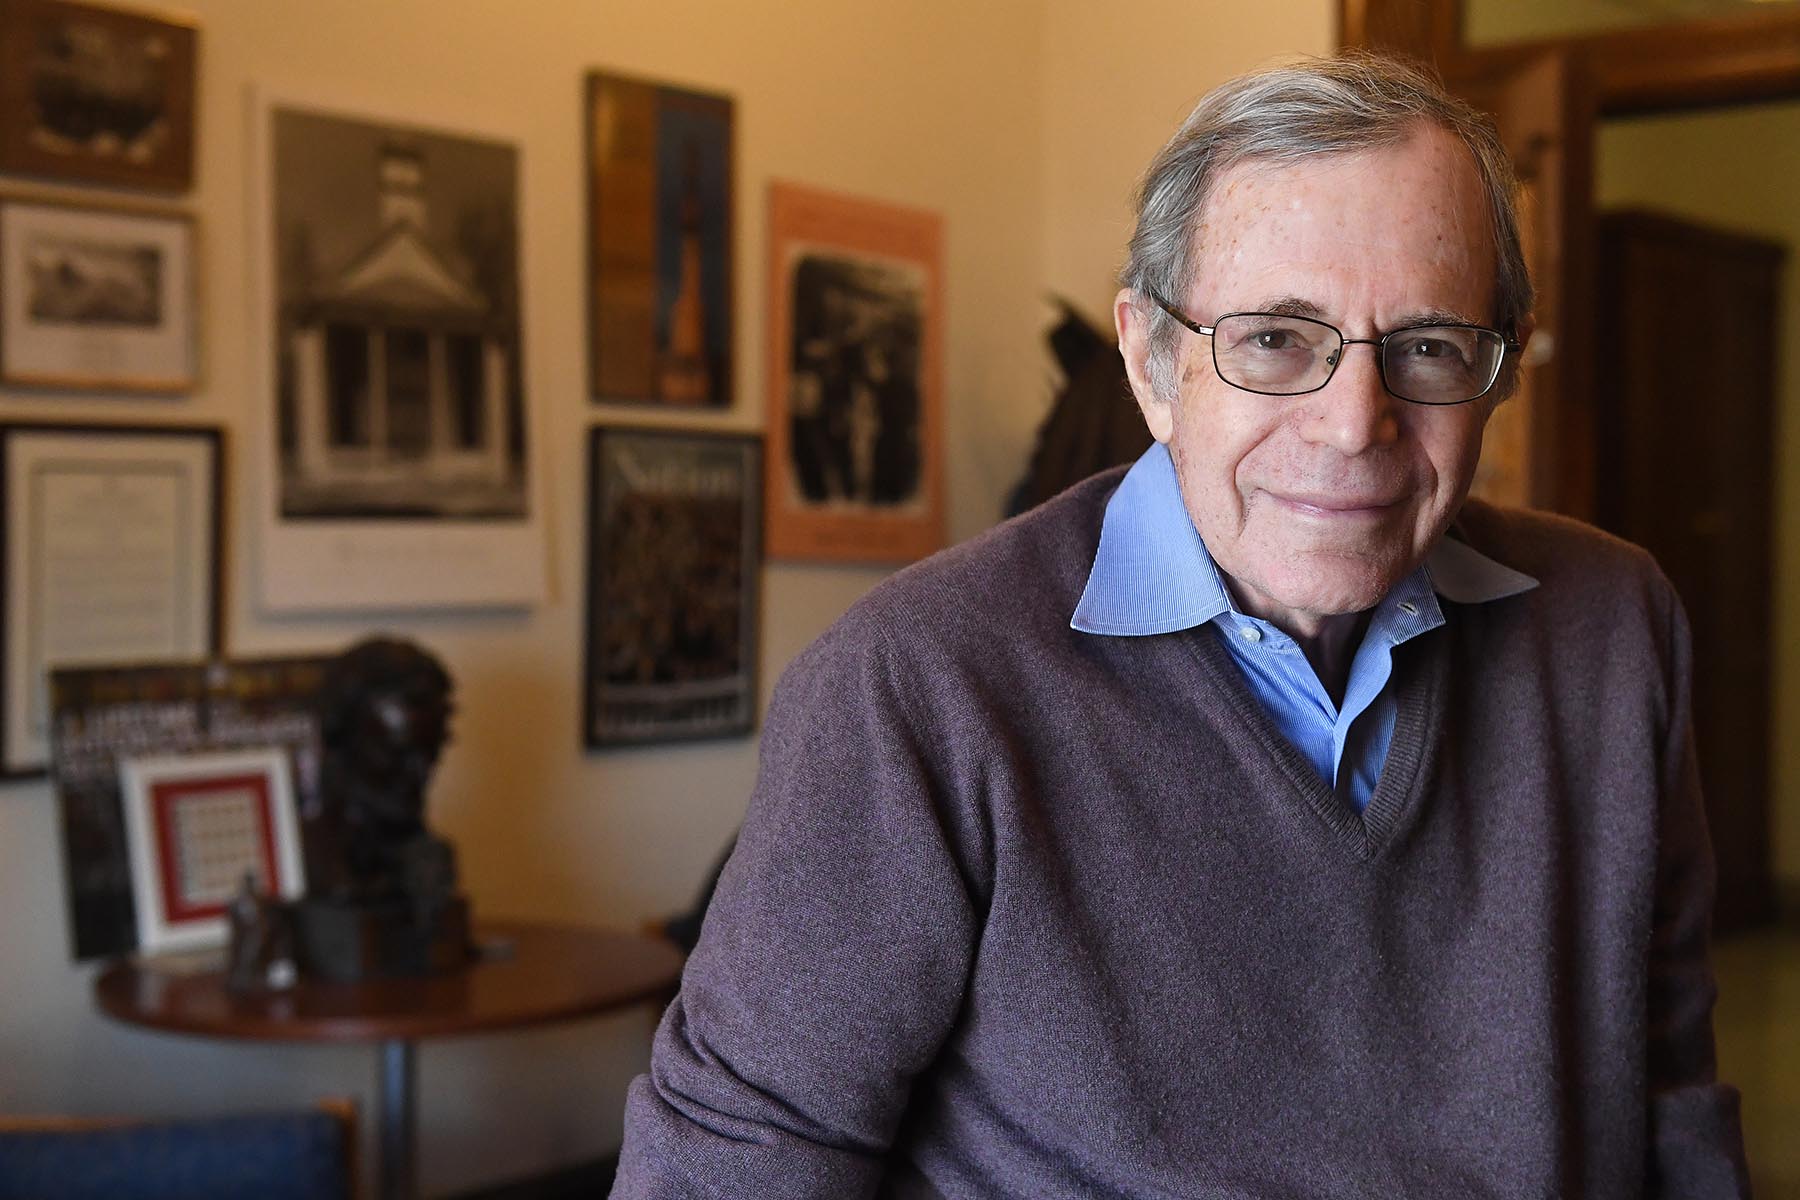 Image of Eric Foner in office in front of historic images